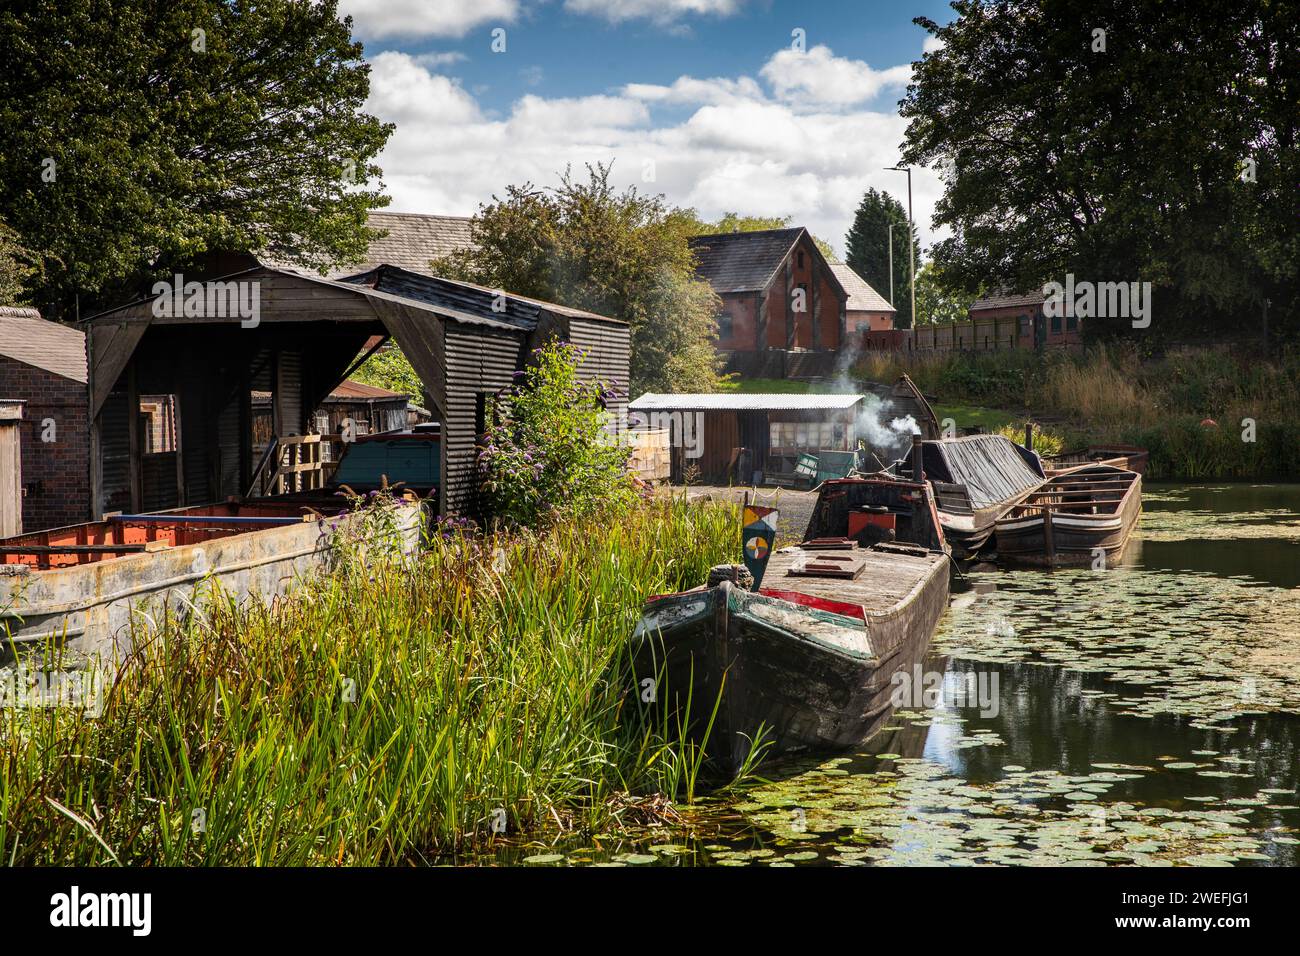 UK, England, West Midlands, Dudley, Black Country Museum, Boat Dock, moored canal narrowboats Stock Photo